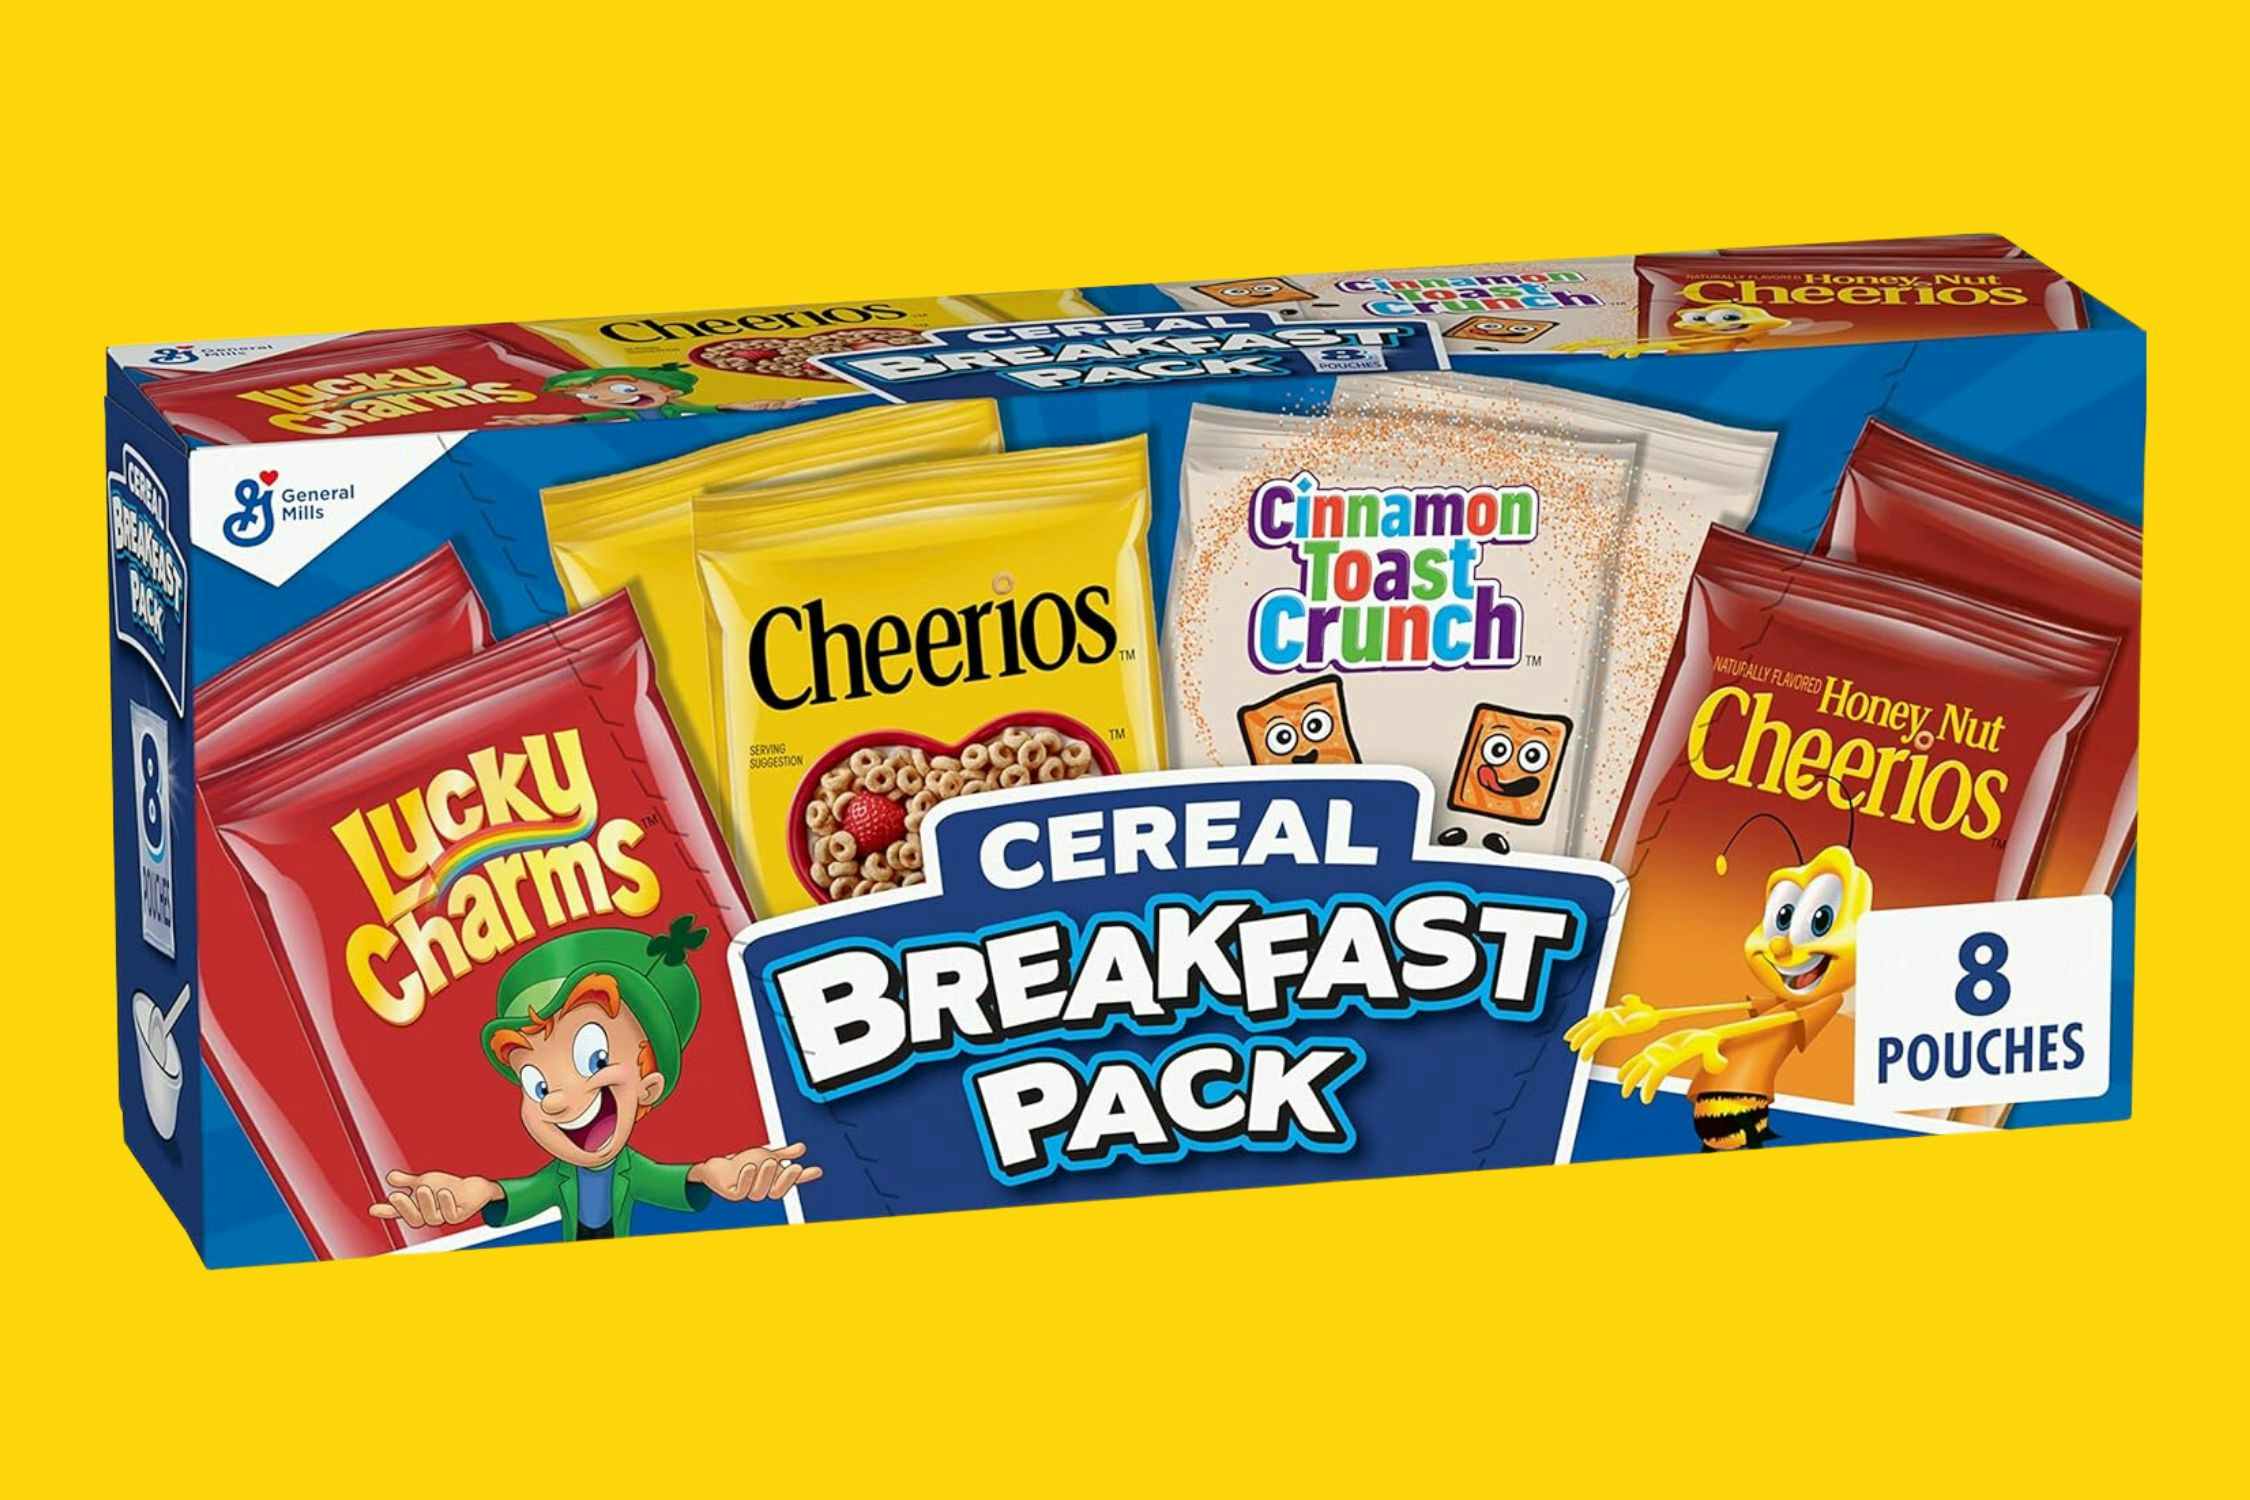 Breakfast Cereal Variety Pack, as Low as $3.10 on Amazon 